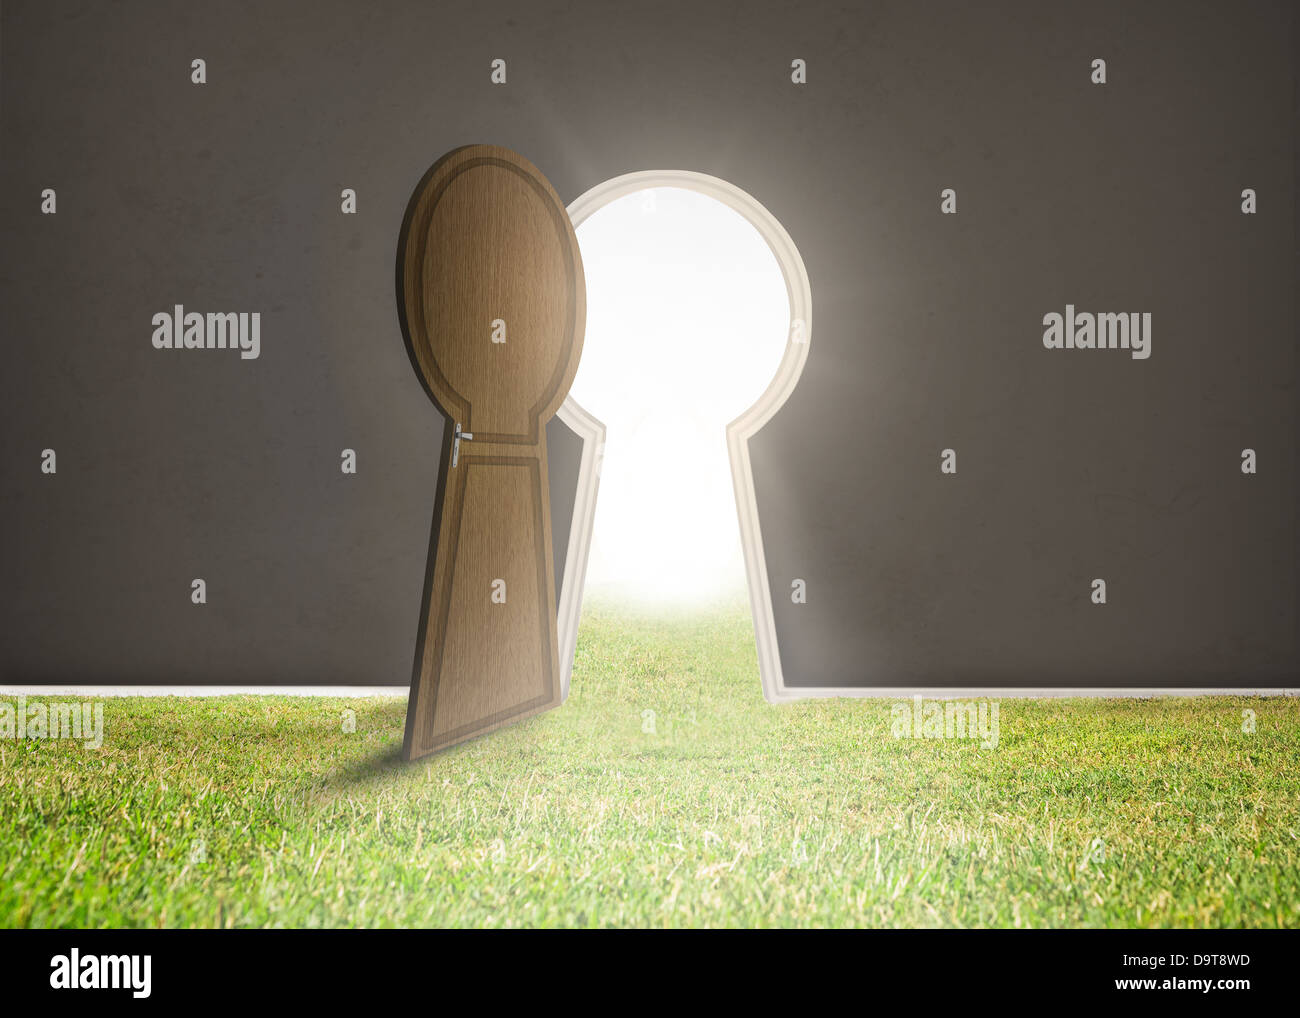 Doorway opening to bright light with grass Stock Photo